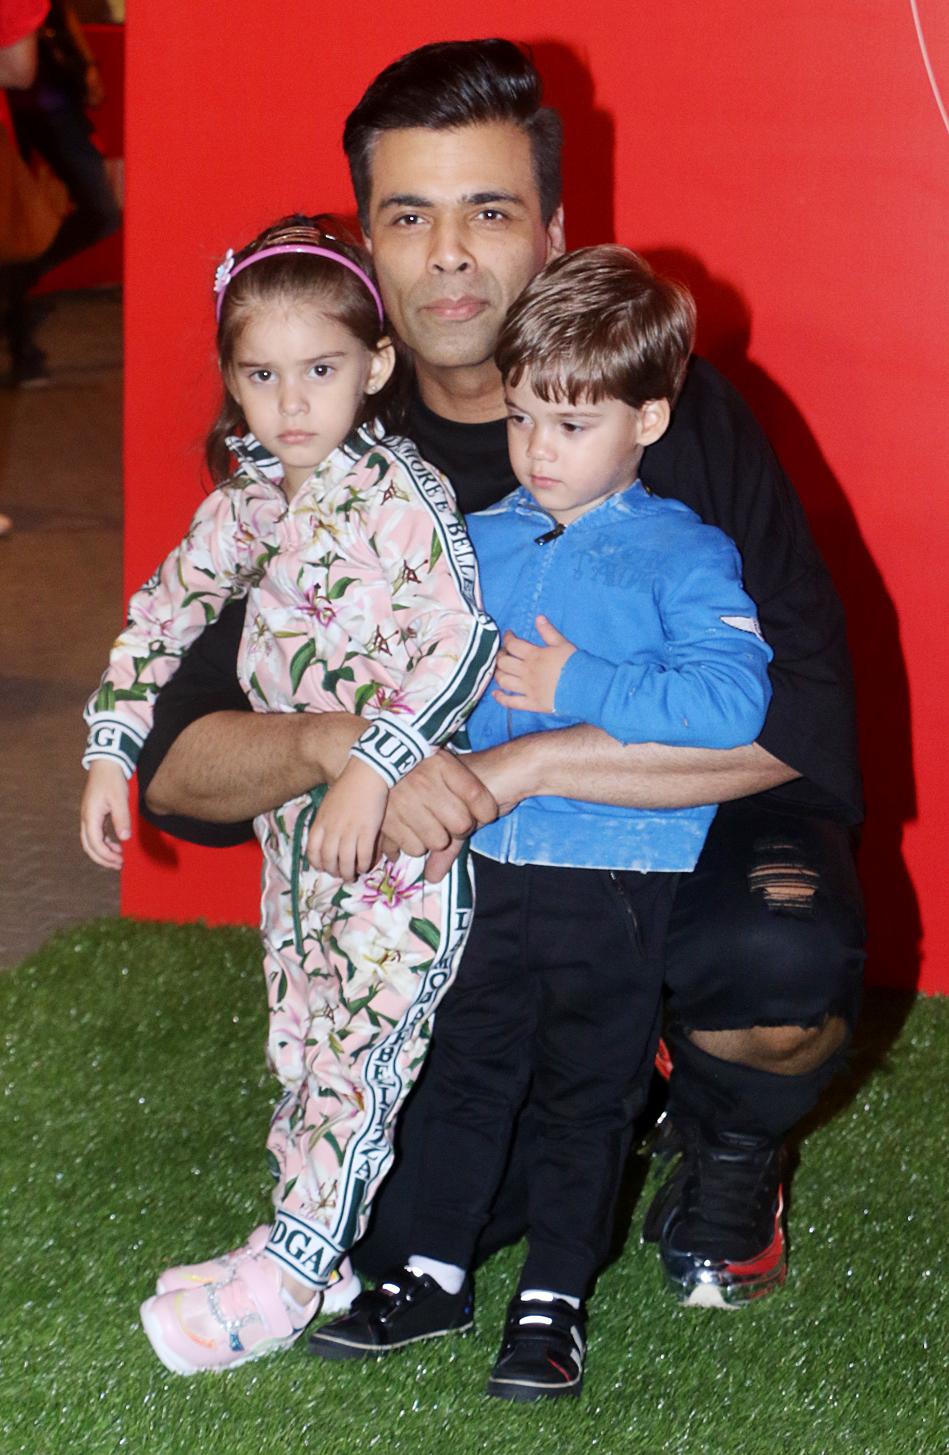 Director, producer and actor Karan Johar also attended the grand event. Karan was seen posing with his children Yash and Roohi for the paparazzi. The three made for a happy family as they were all smiles for the lenses